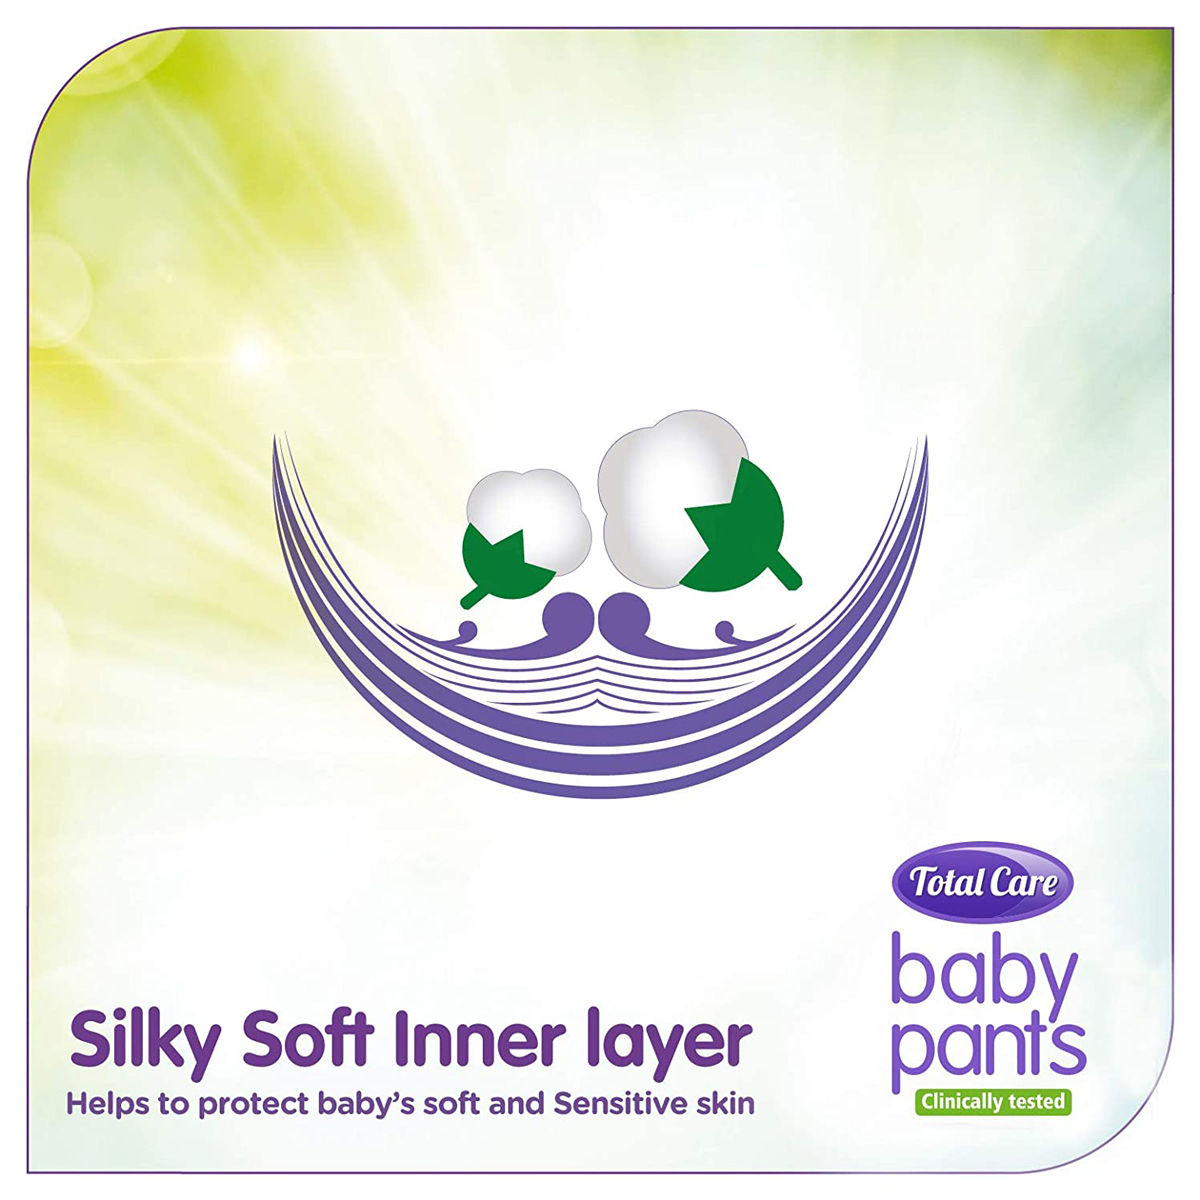 Himalaya Total Care Baby Diaper Pants XL, 54 Count, Pack of 1 